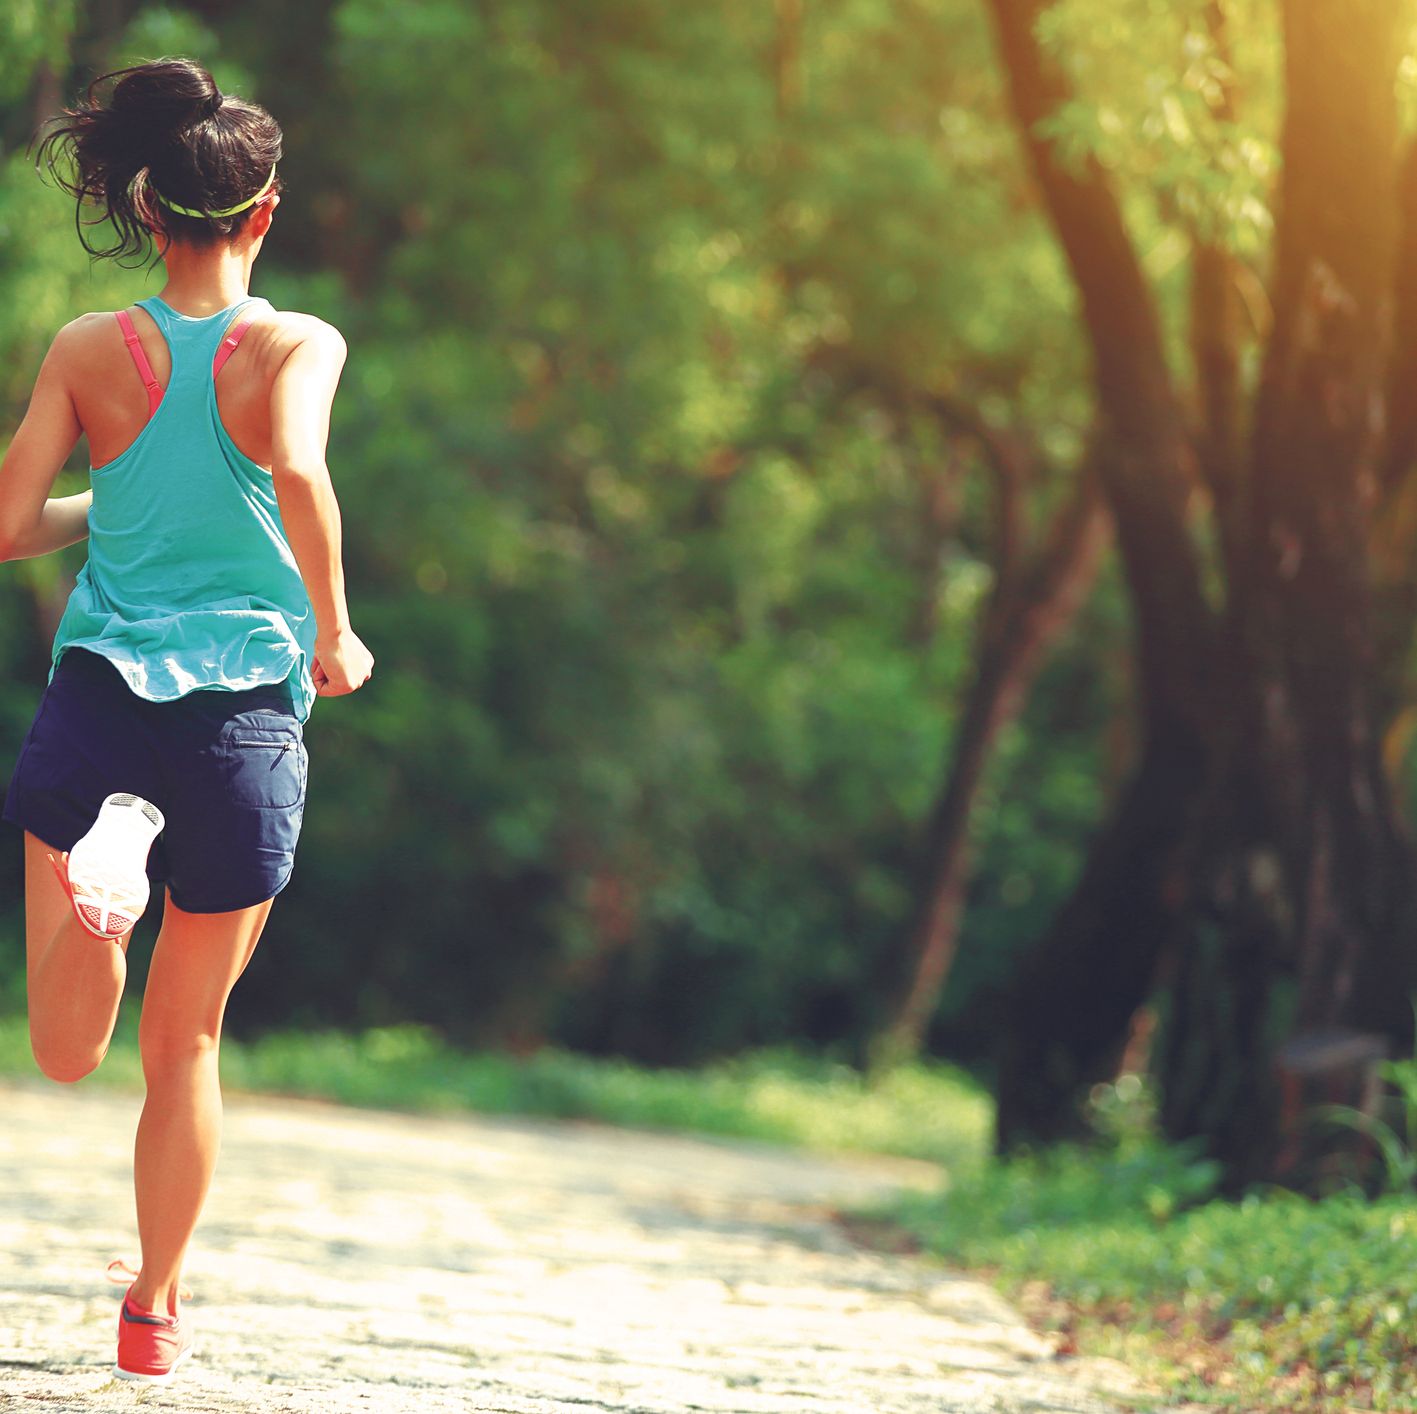 Girl running in park - Stock Image - F022/6972 - Science Photo Library